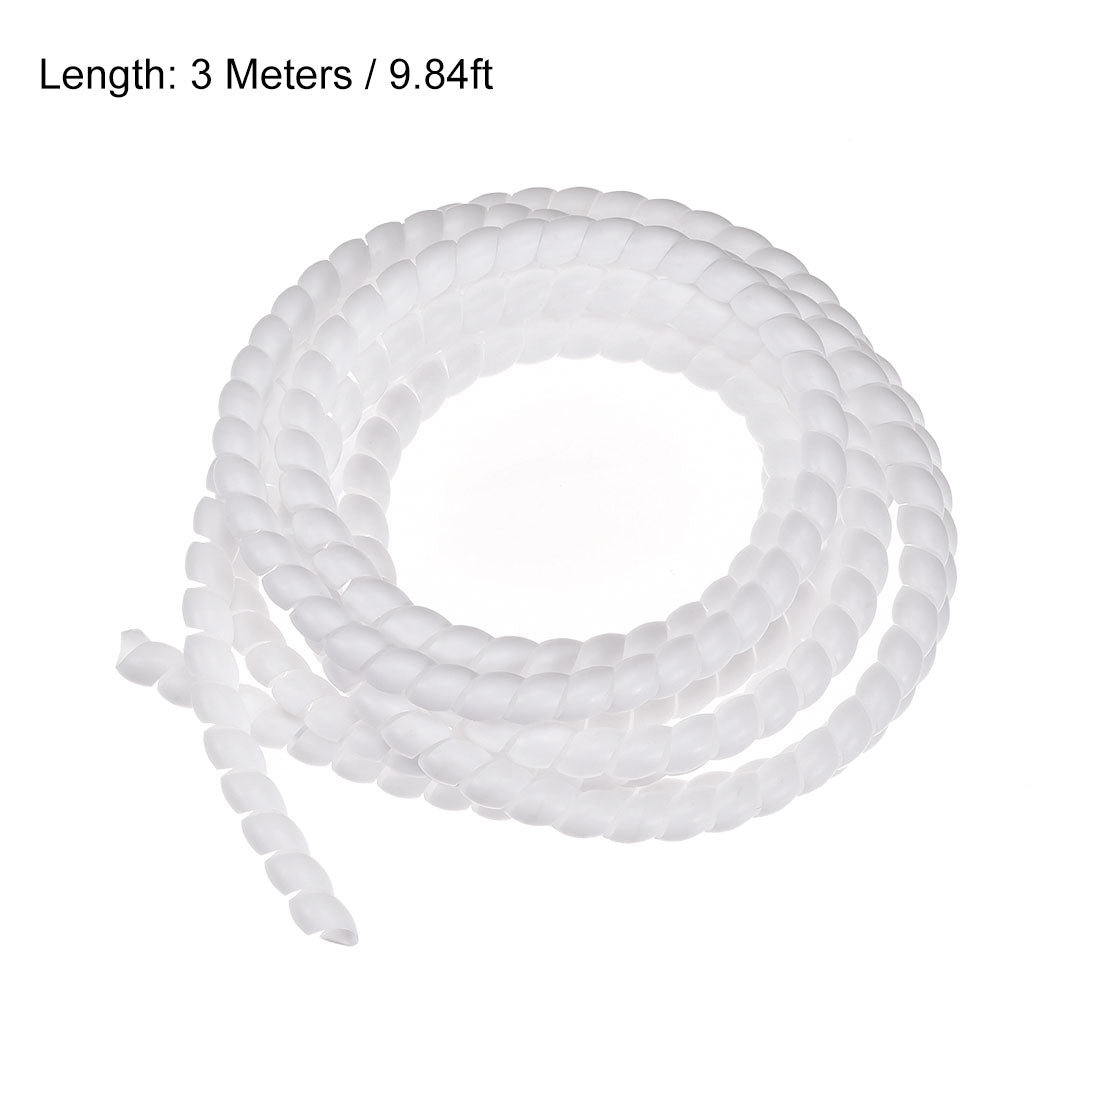 uxcell Uxcell Flexible Spiral Tube Wrap Cable Management Sleeve 8mm x 10mm Computer Wire Manage Cord 3 Meters Length White